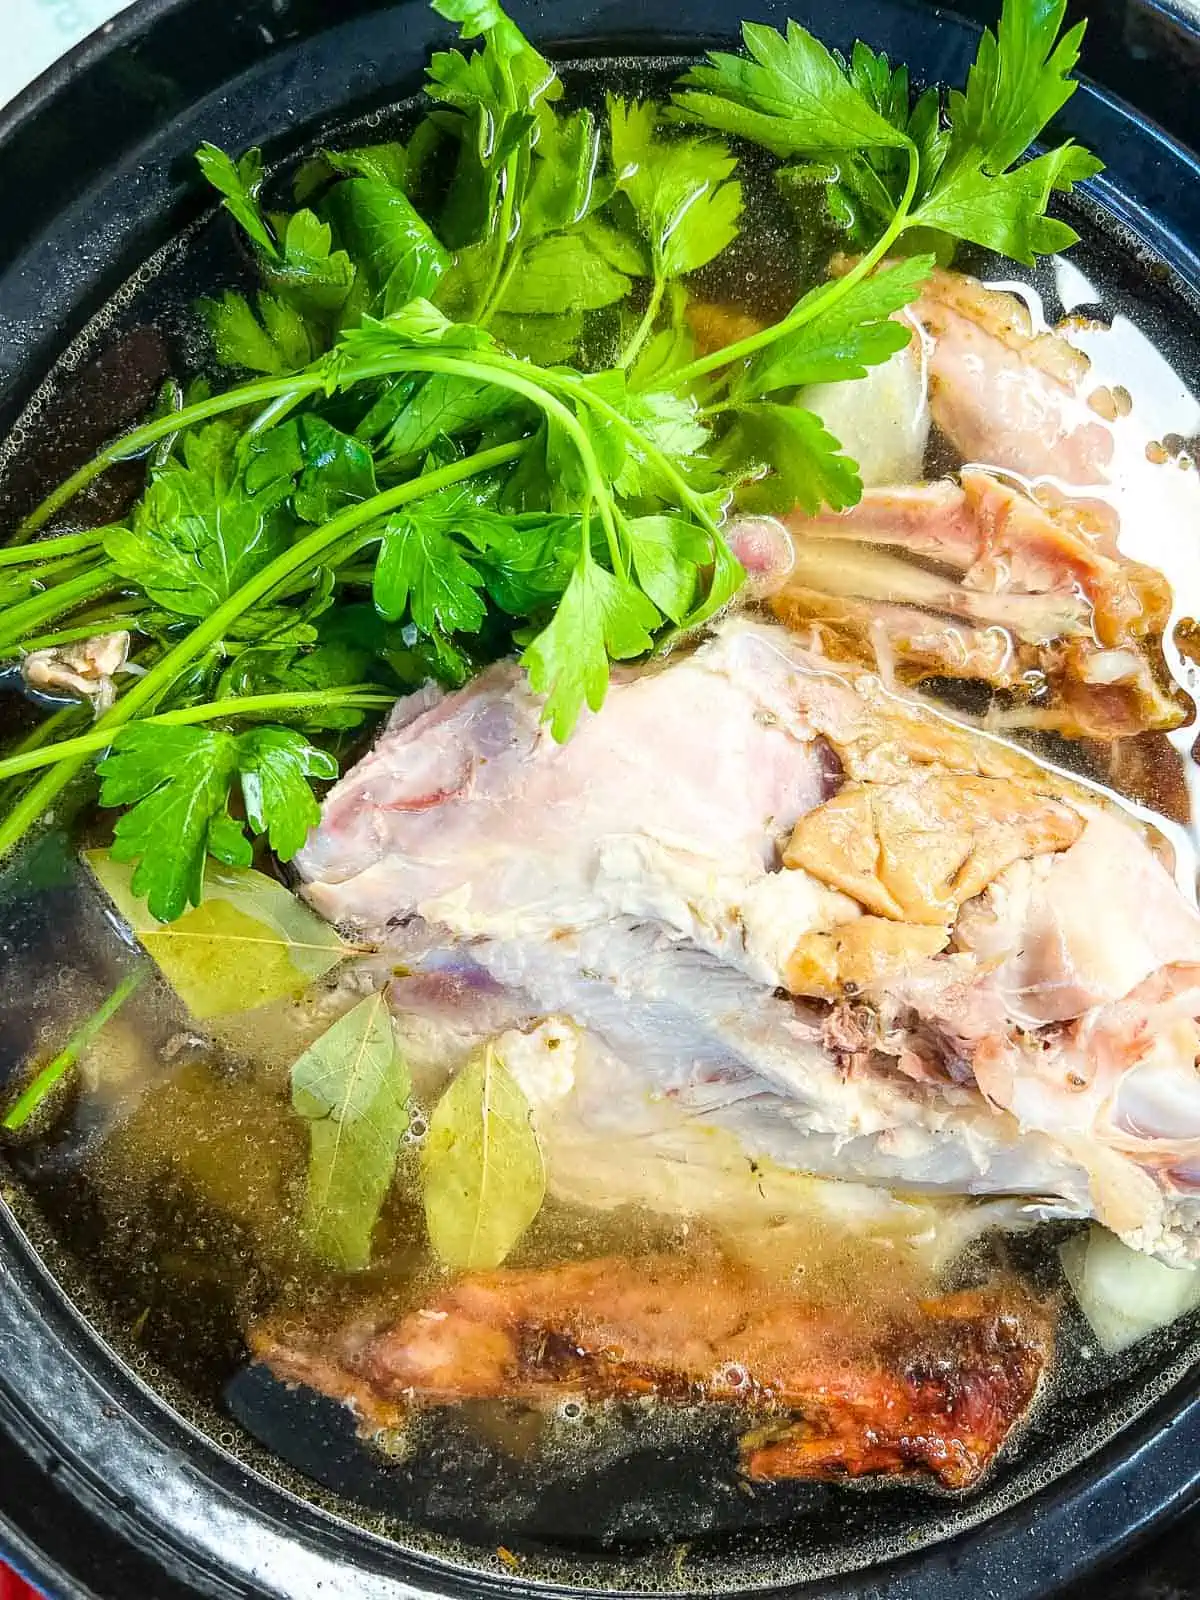 Turkey carcass, water, and additional ingredients added to the pot.